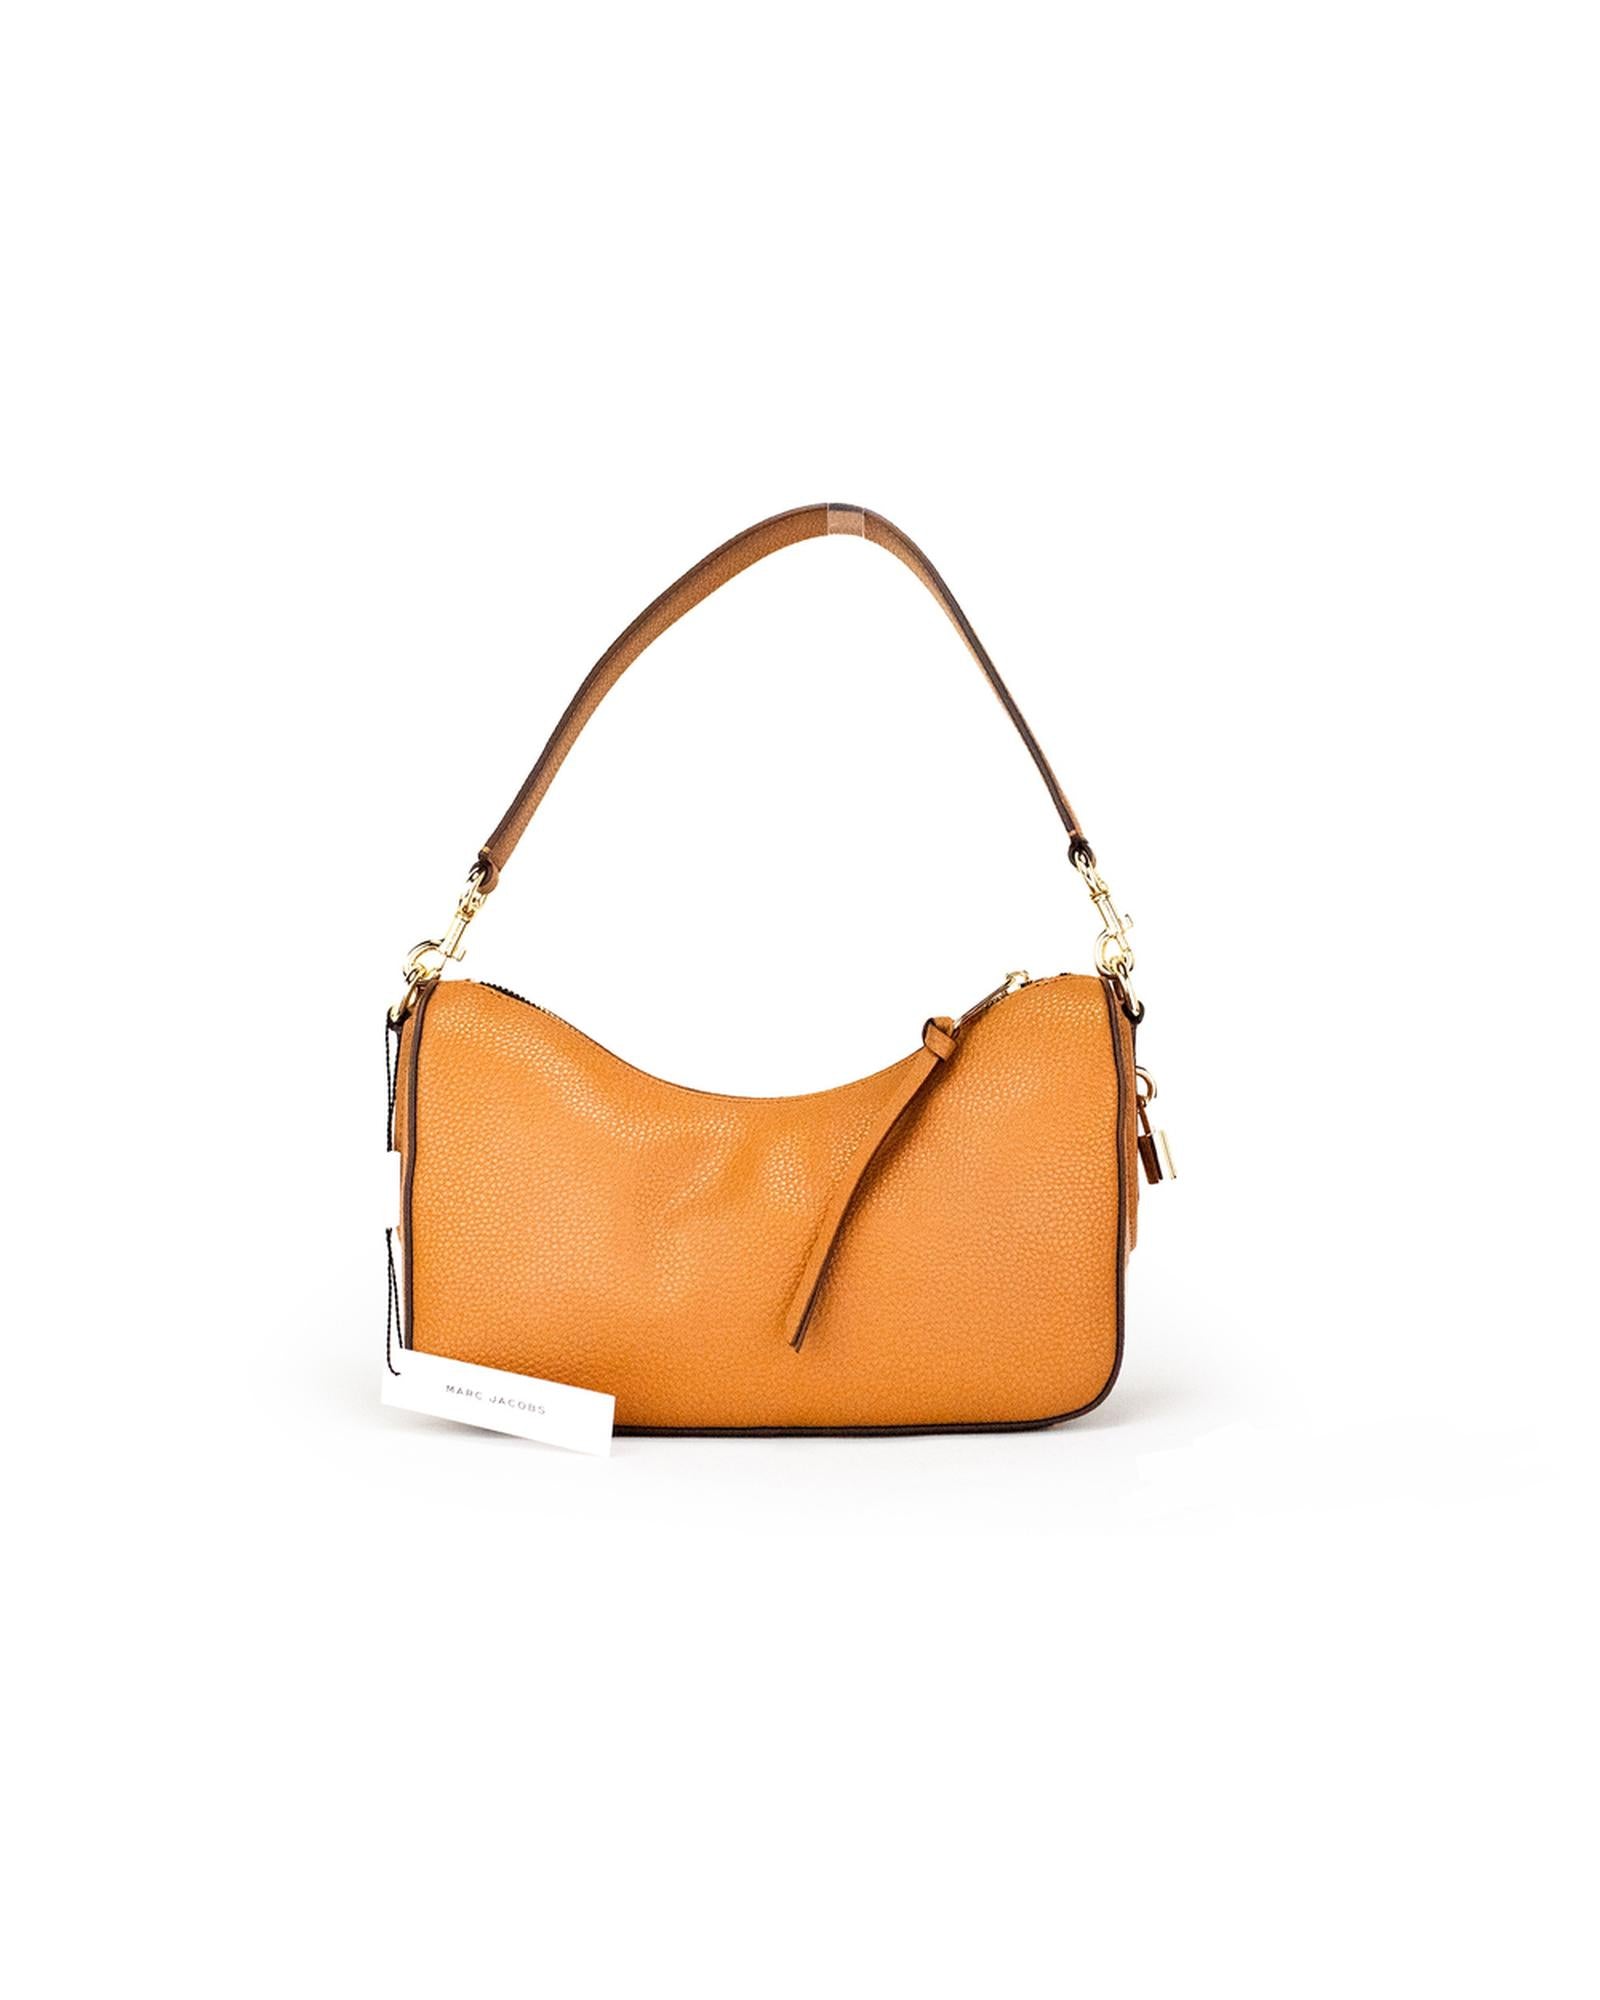 Marc Jacobs Drifter Hobo Bag in Smoked Almond Leather One Size Women